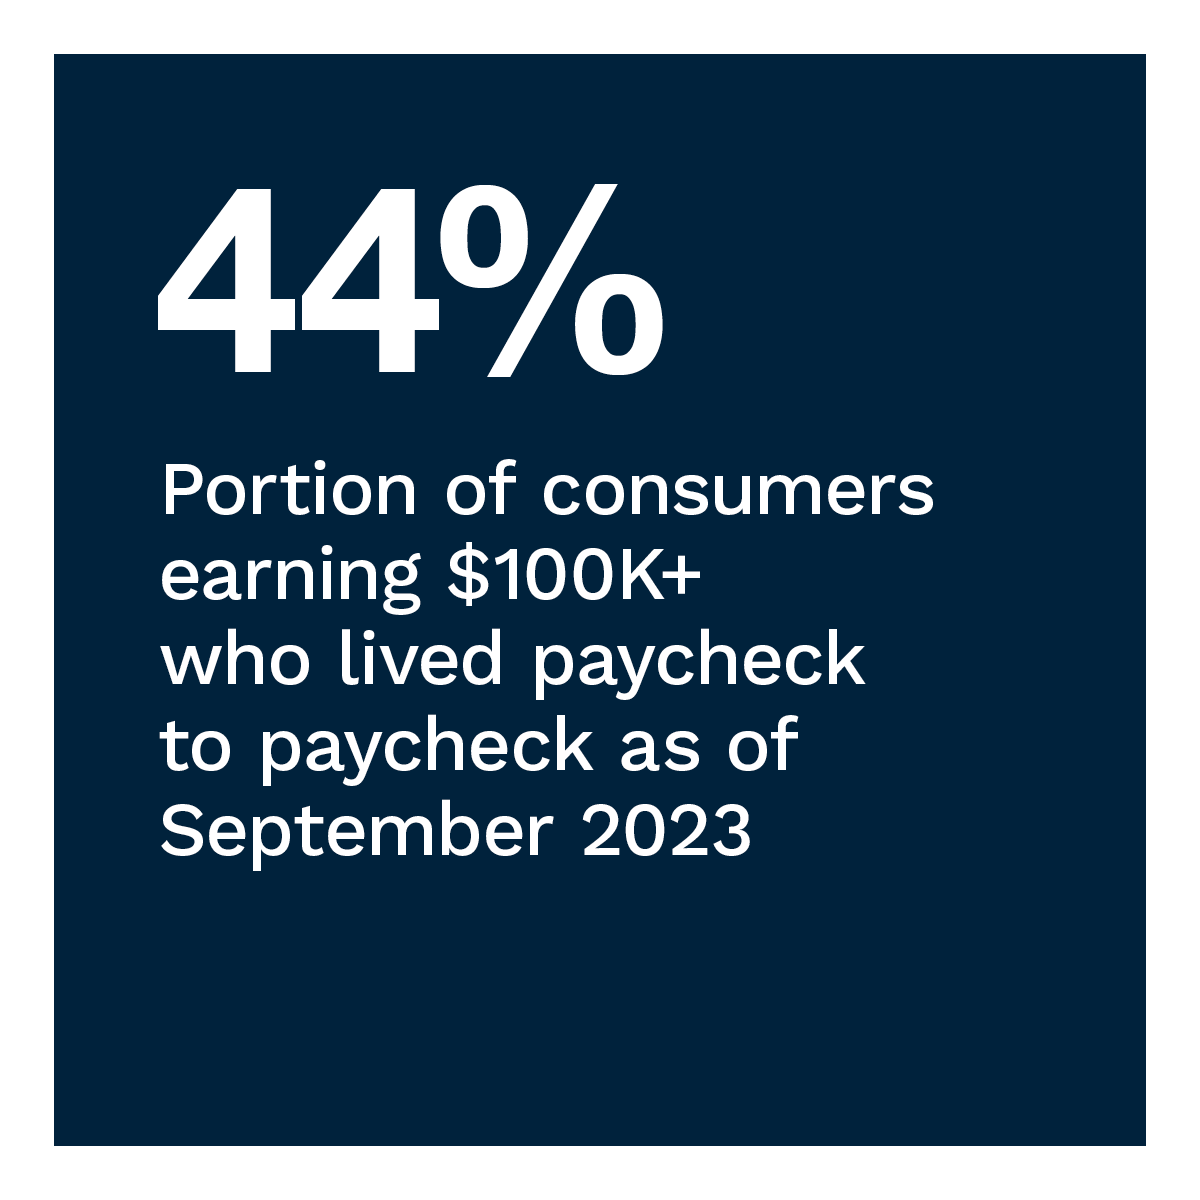 44%: Portion of consumers earning $100K+ who lived paycheck to paycheck as of September 2023